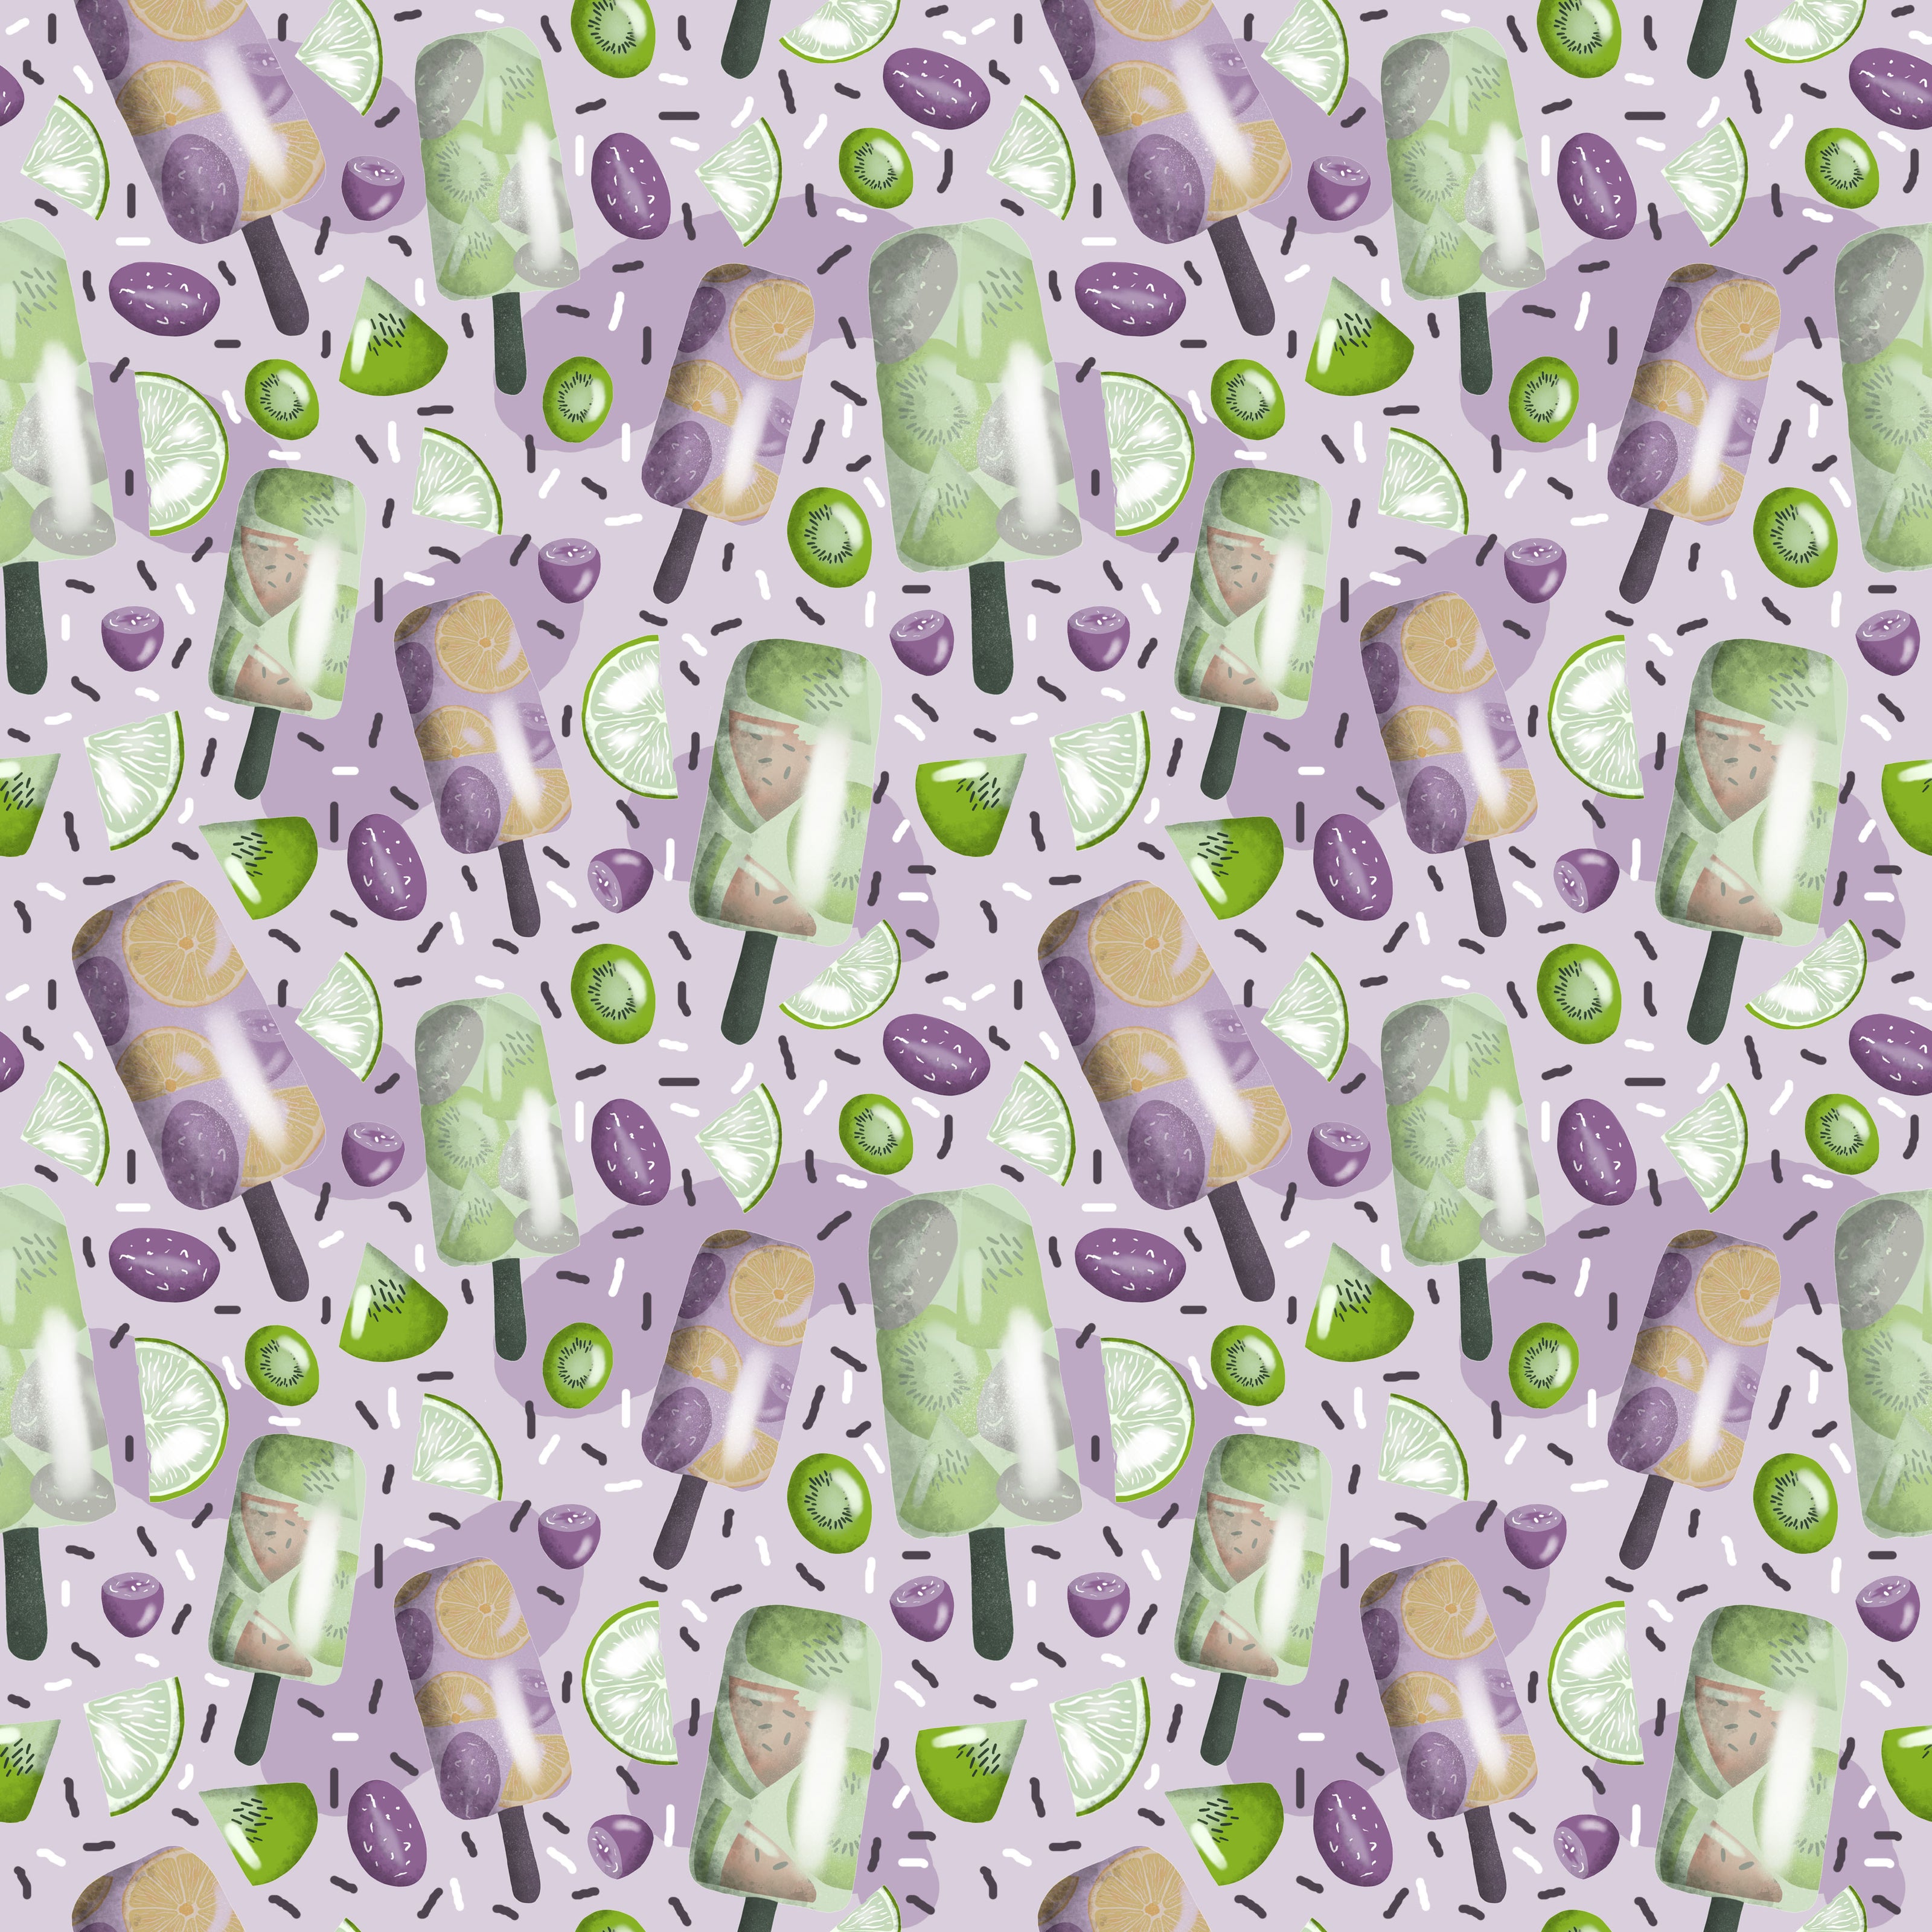 ice lolly surface pattern design